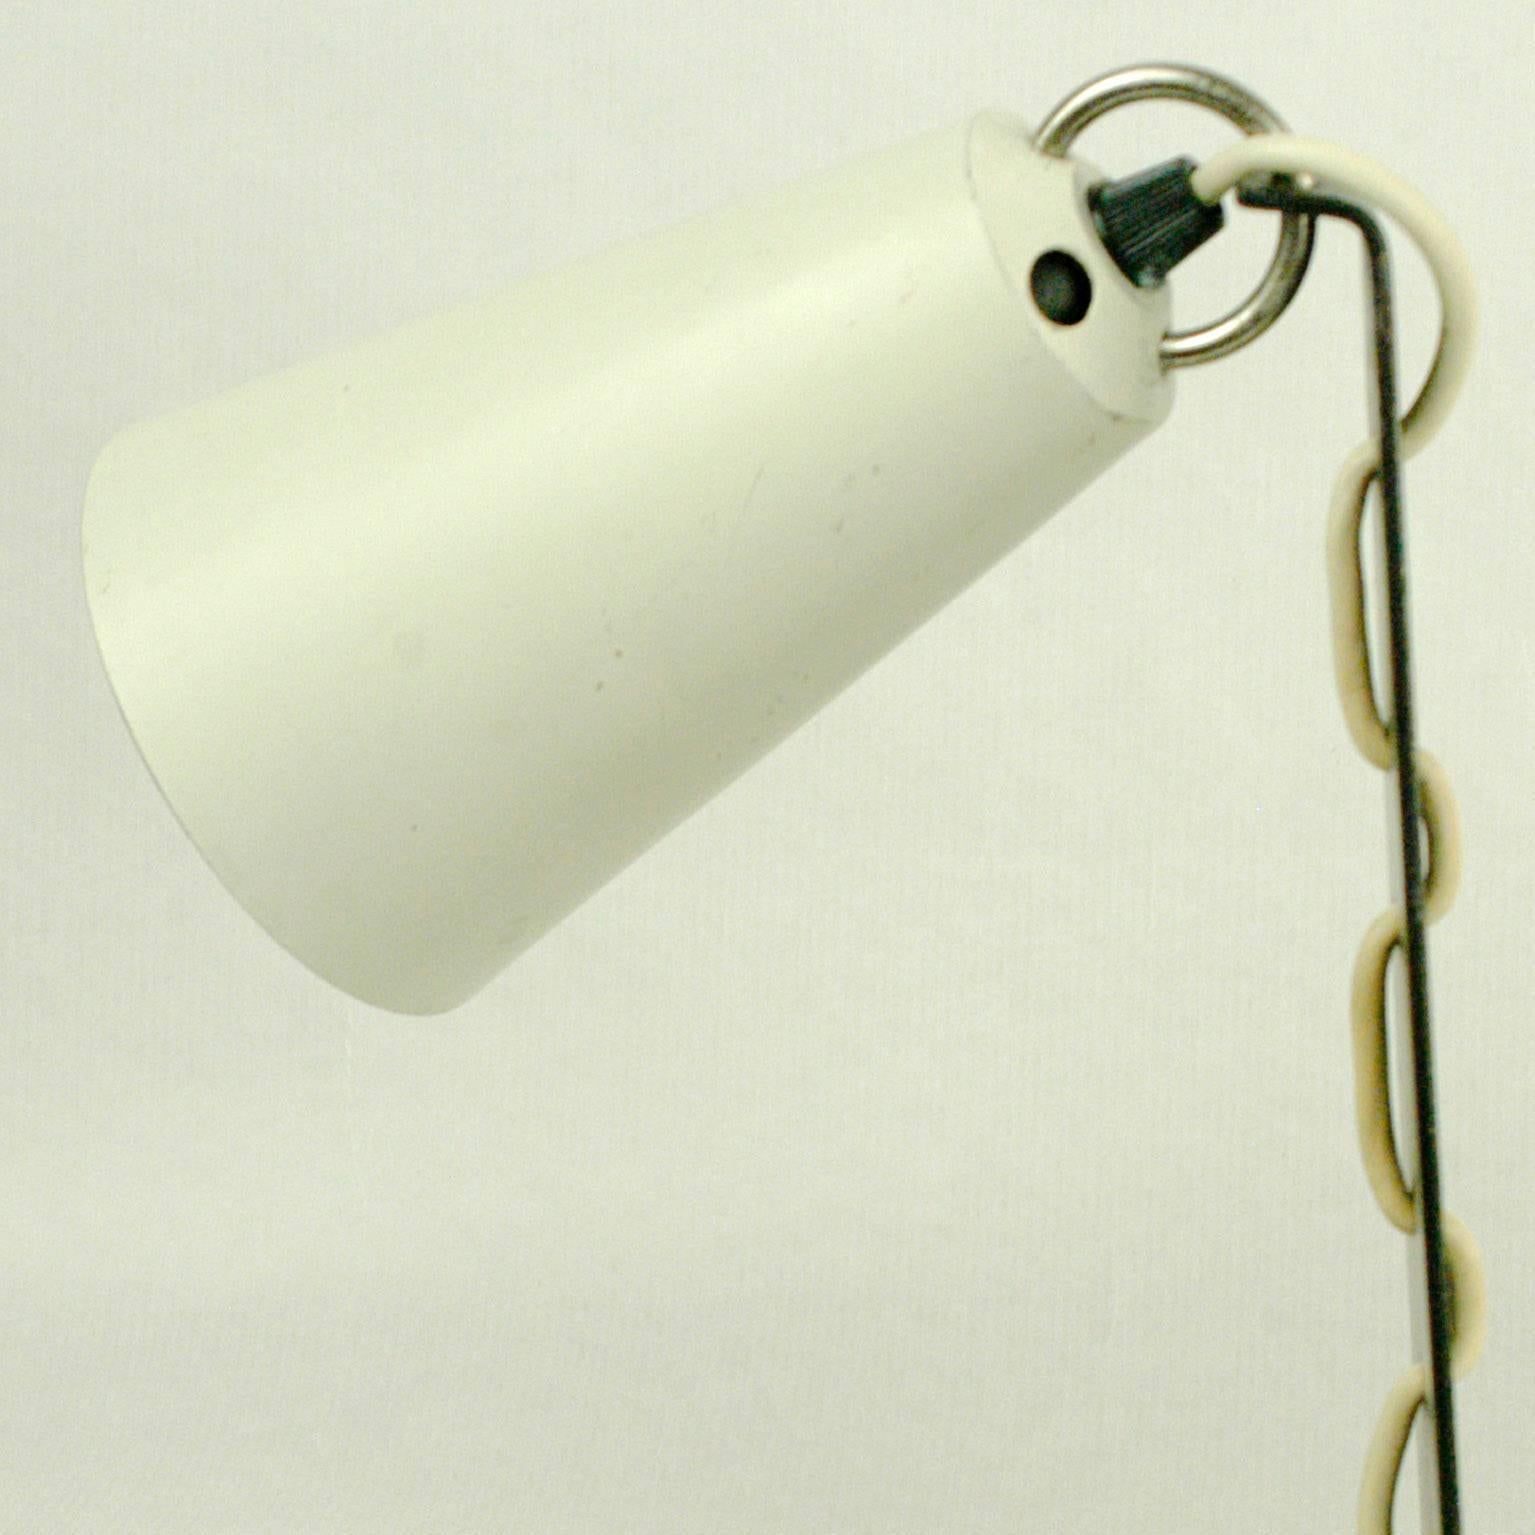 Rare and charming  Austrian Mid-Century Modern table light, model no. 1246, designed and manufactured by J.T. Kalmar Vienna.
It features a adjustable shade in every position, all in very nice original condition with some slight signs of wear.